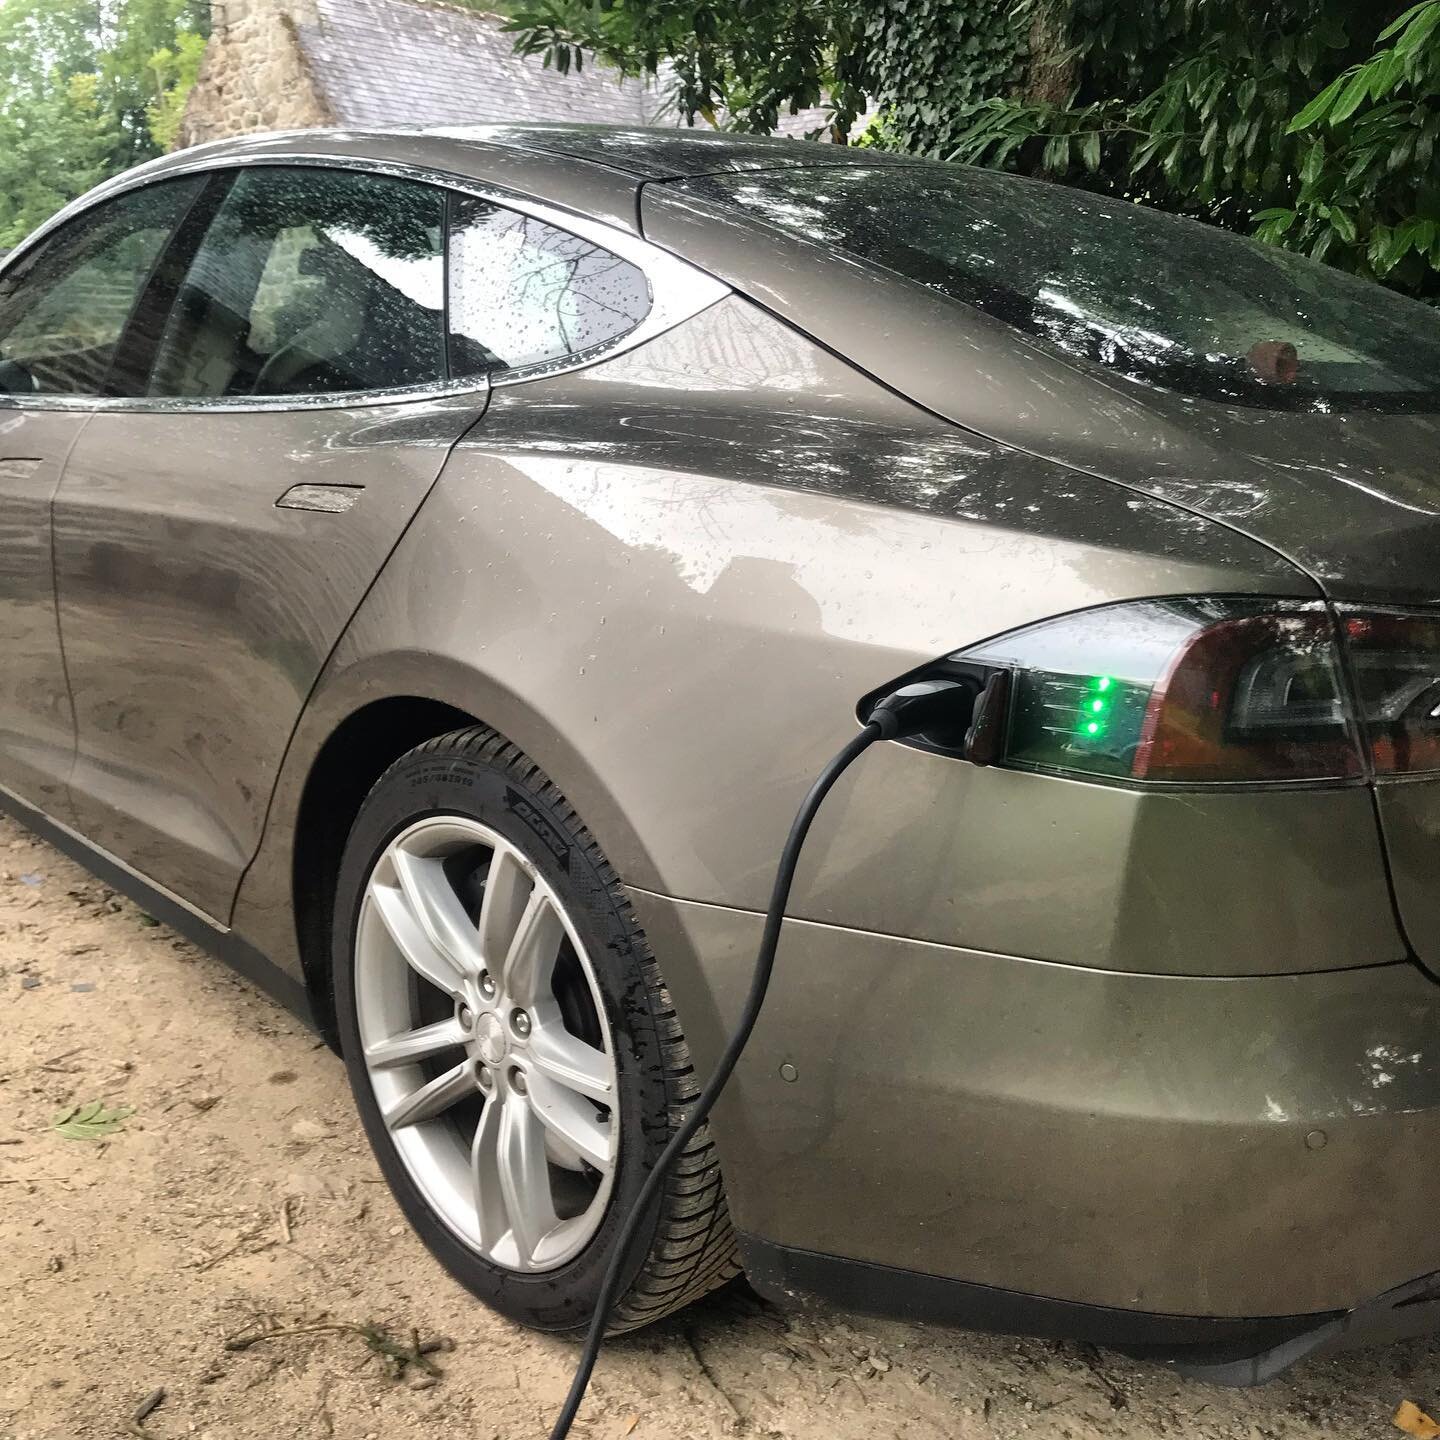 Come with your Tesla, we can re-charge it ! #glamping #tesla #quickcharge #begmeil #electriccar